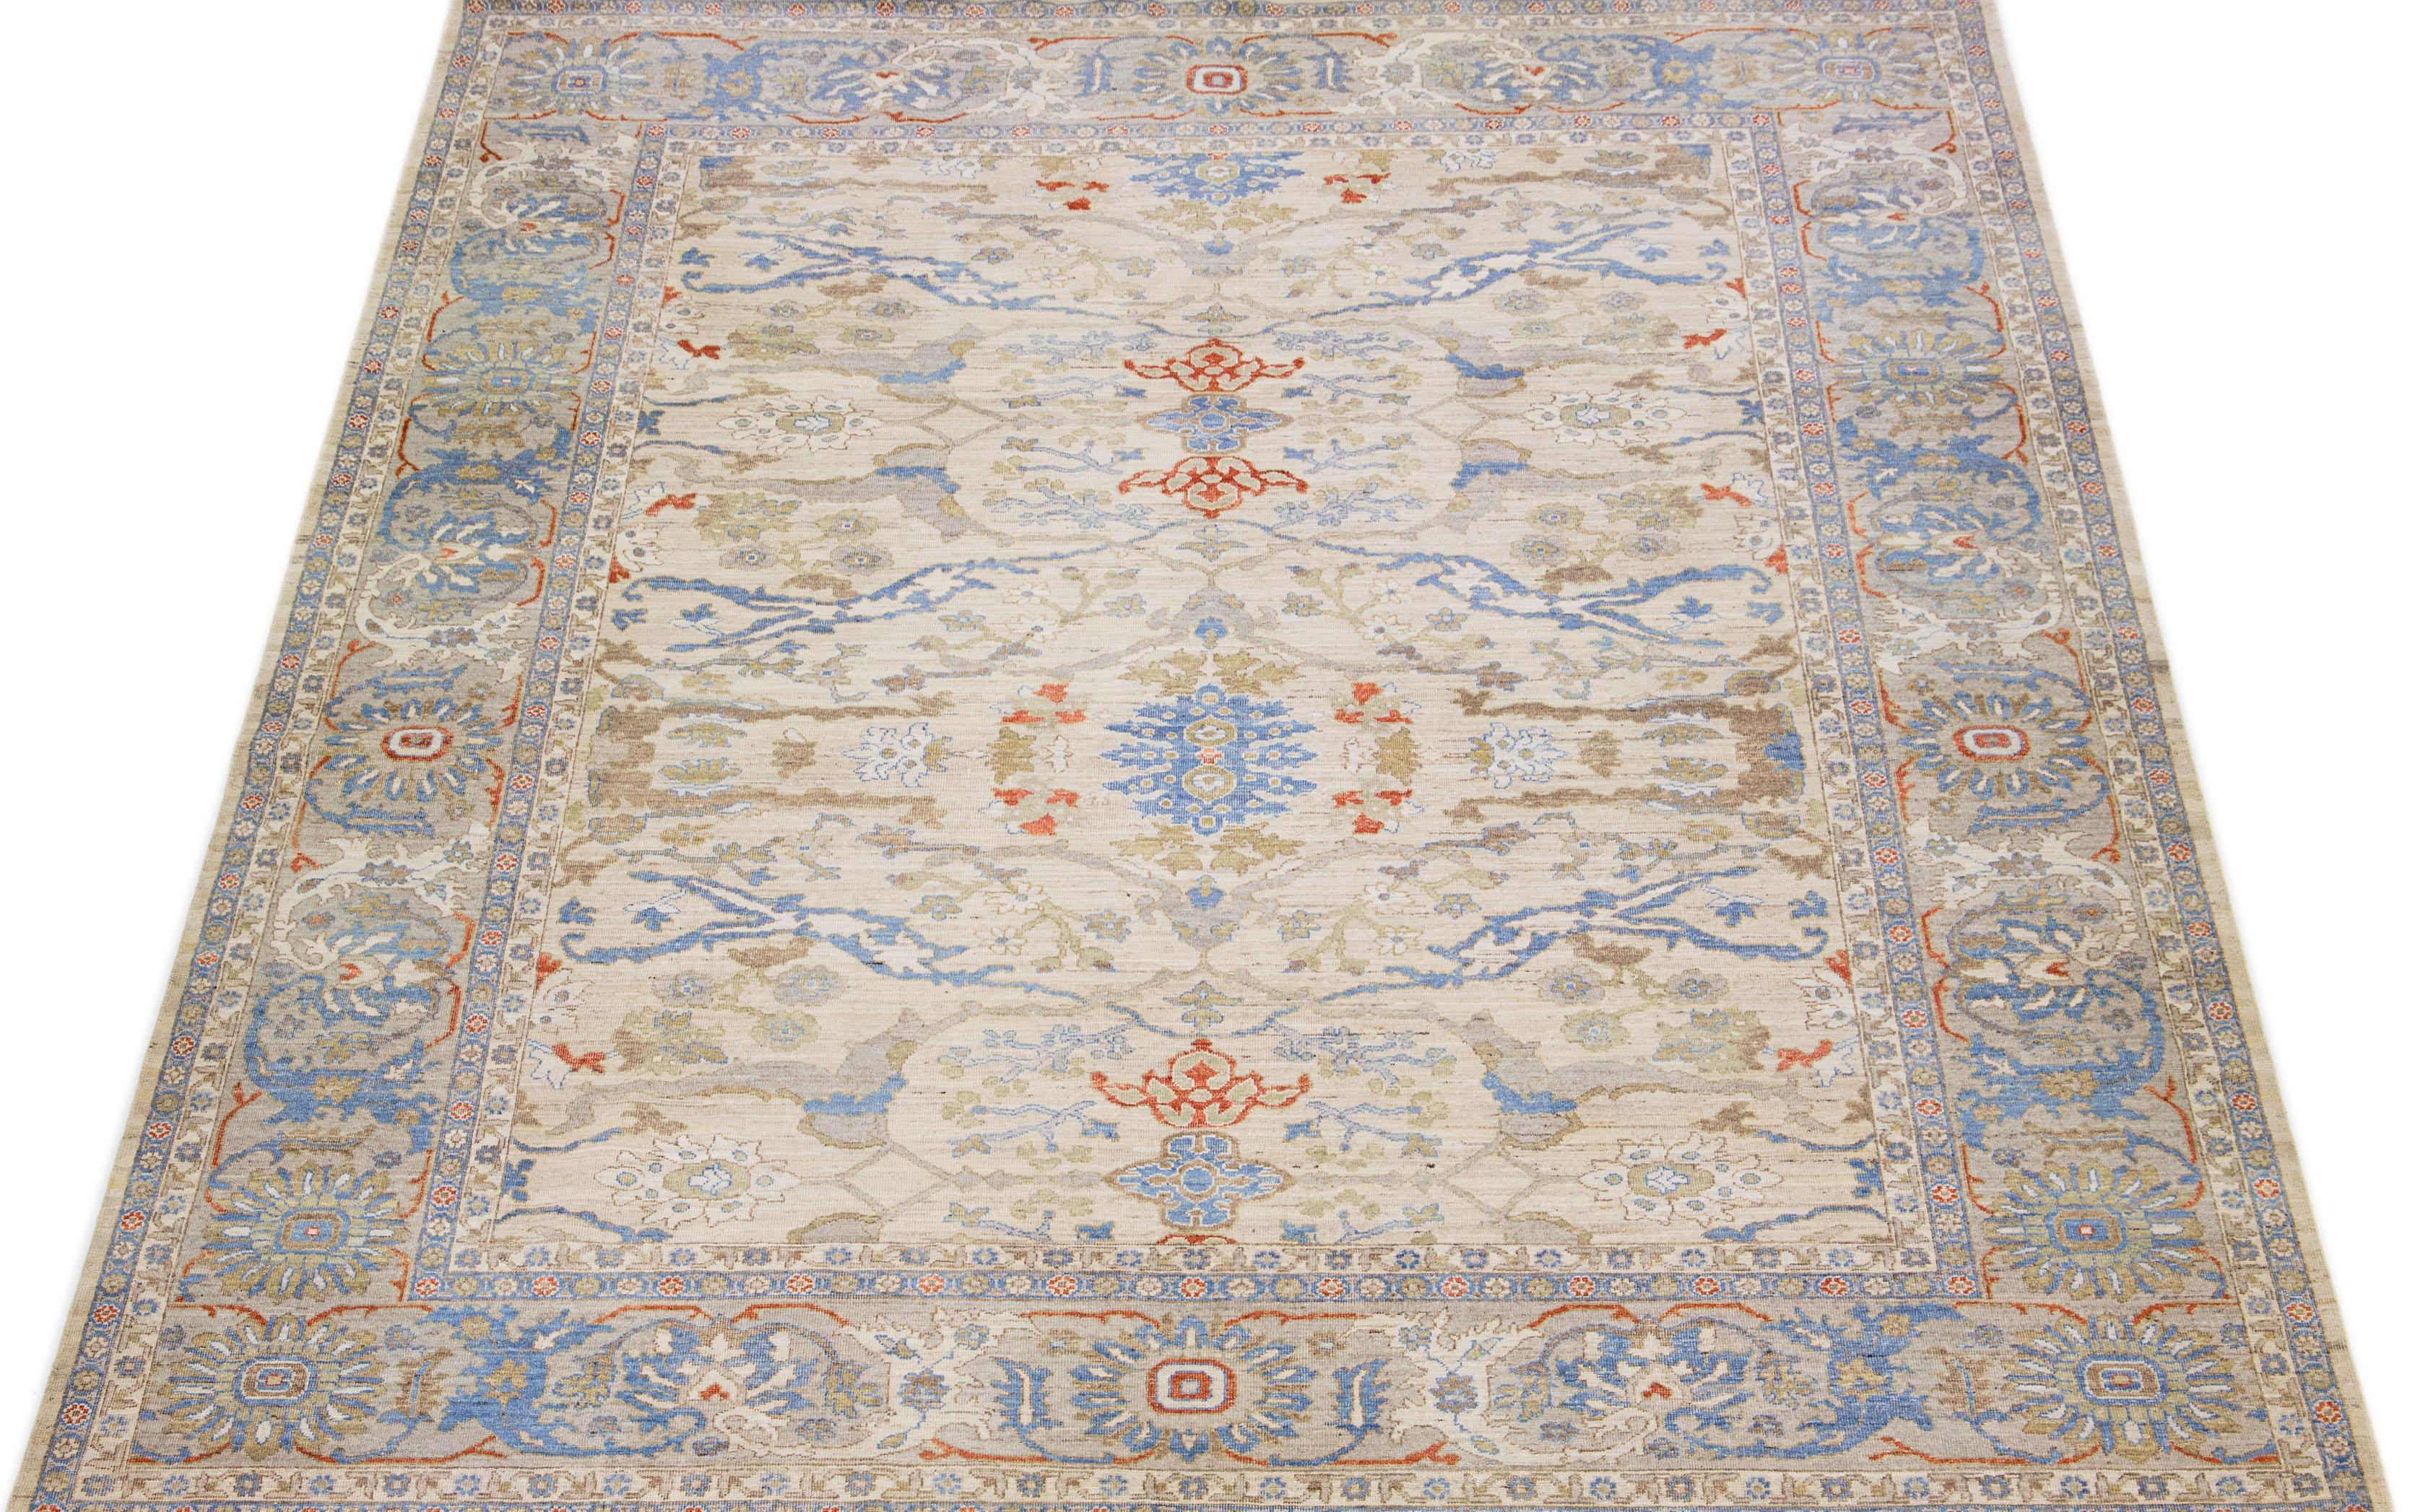 This hand-knotted wool rug showcases an exquisite modern Oversize Sultanabad design in a stunning beige color palette. Its intricate frame features captivating accents in rust, blue, and brown hues arranged in a remarkable all-over pattern.

This